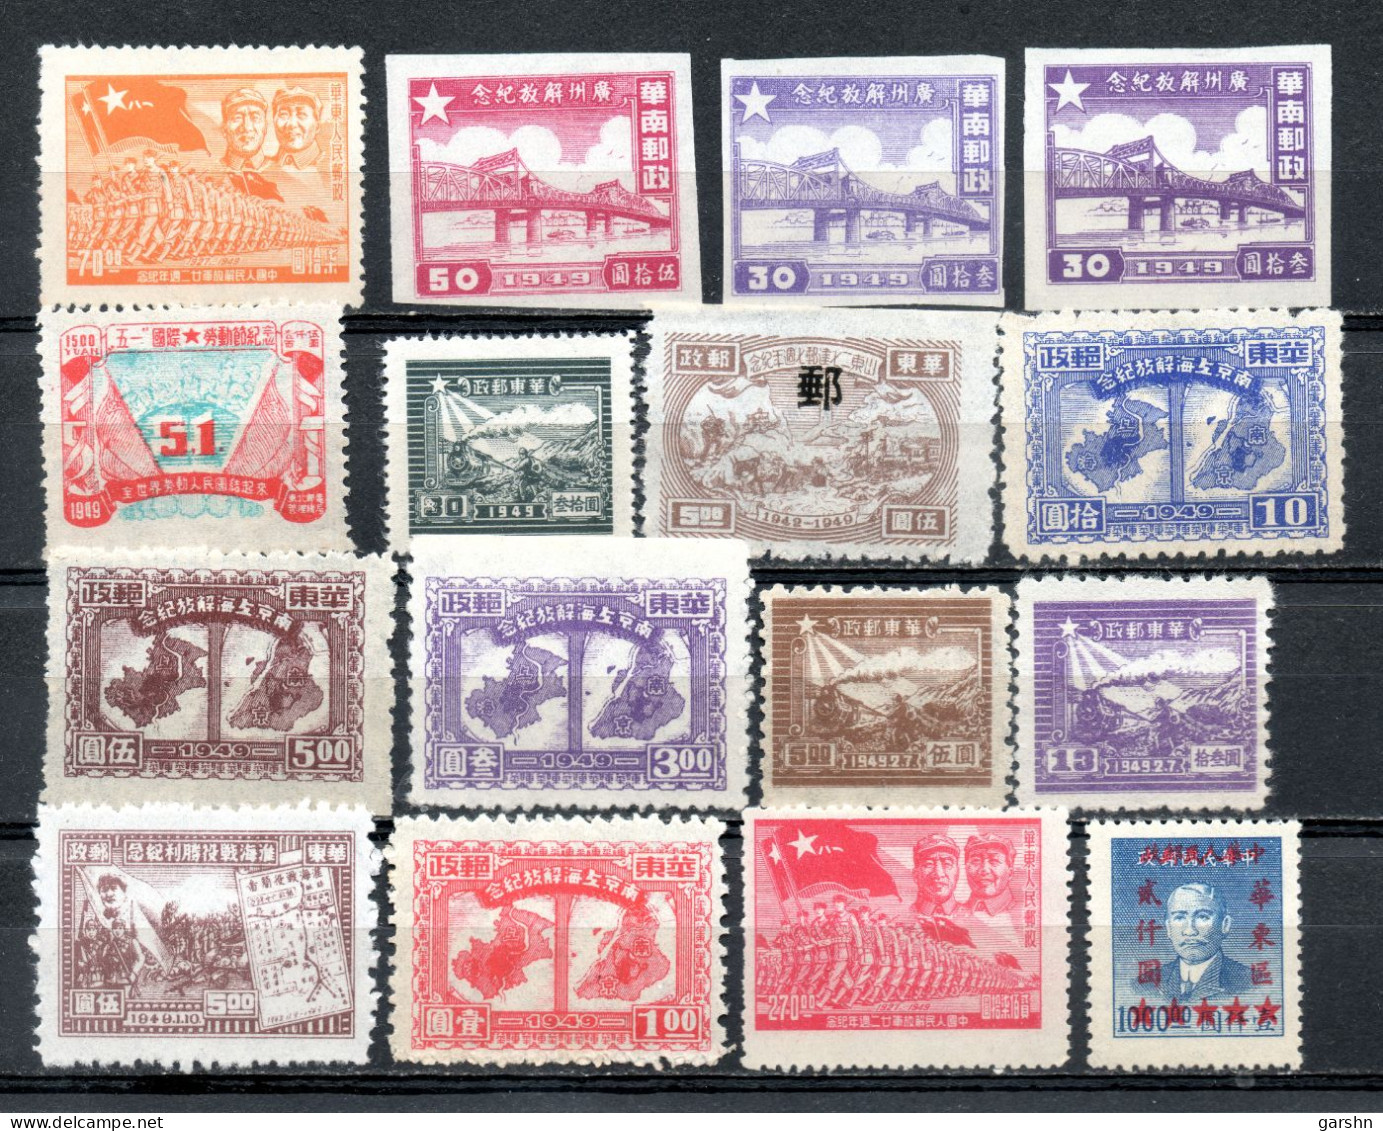 China Chine : (1 )  Lot De Timbres Chine Communiste - China Oriental 1949-50